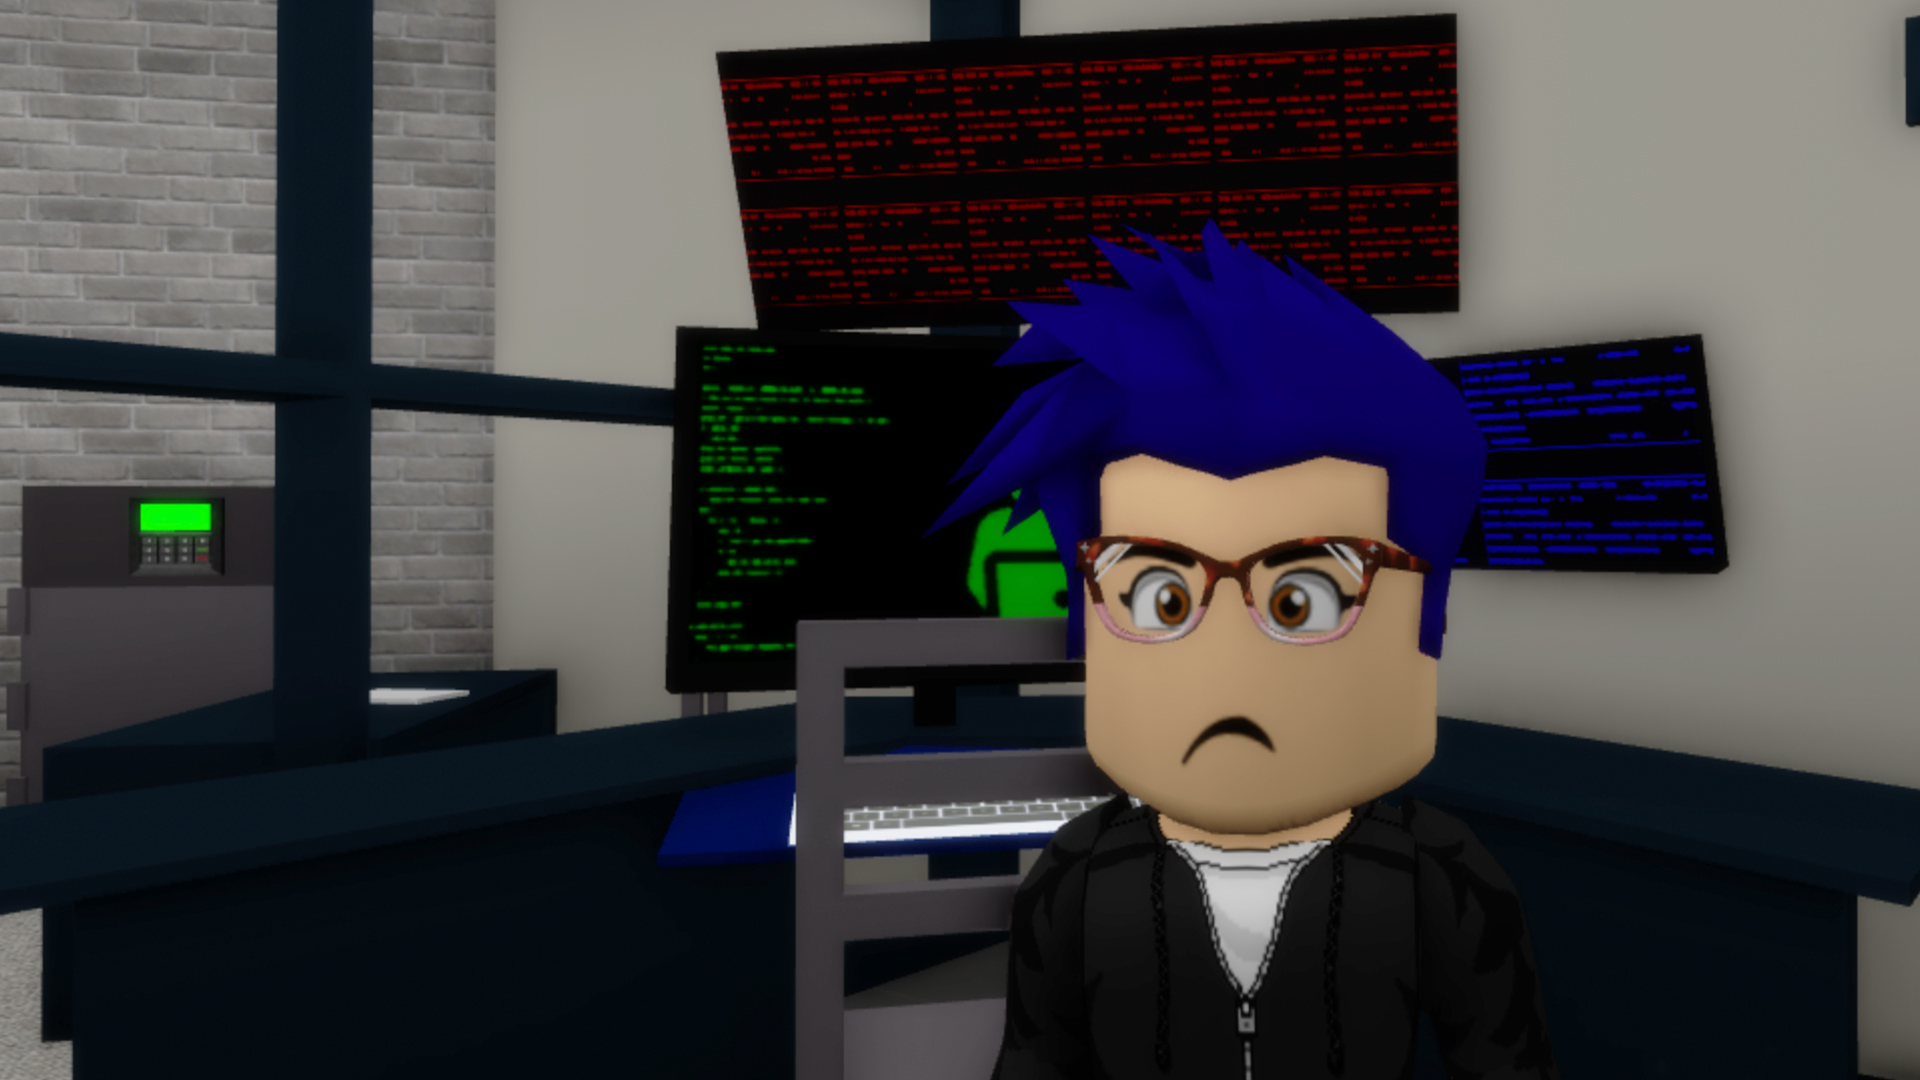 Roblox hack returns, banning innocent players from the platform